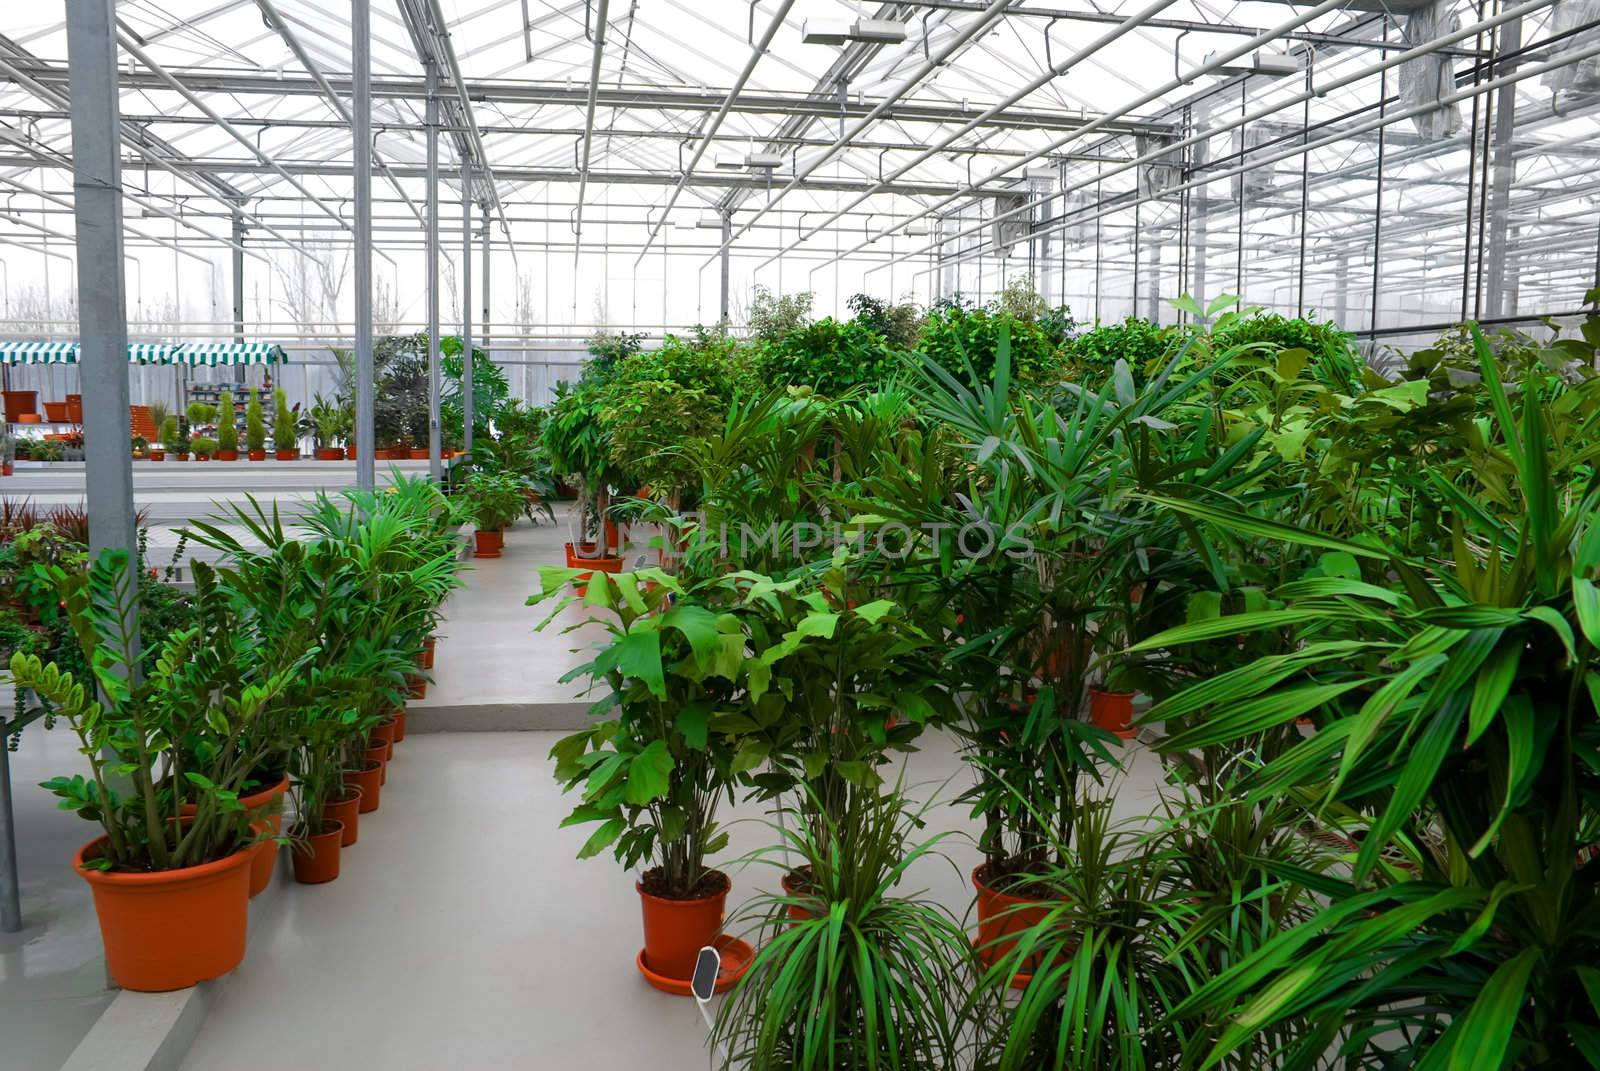 The Industrial hothouse, in which grow the decorative plants.